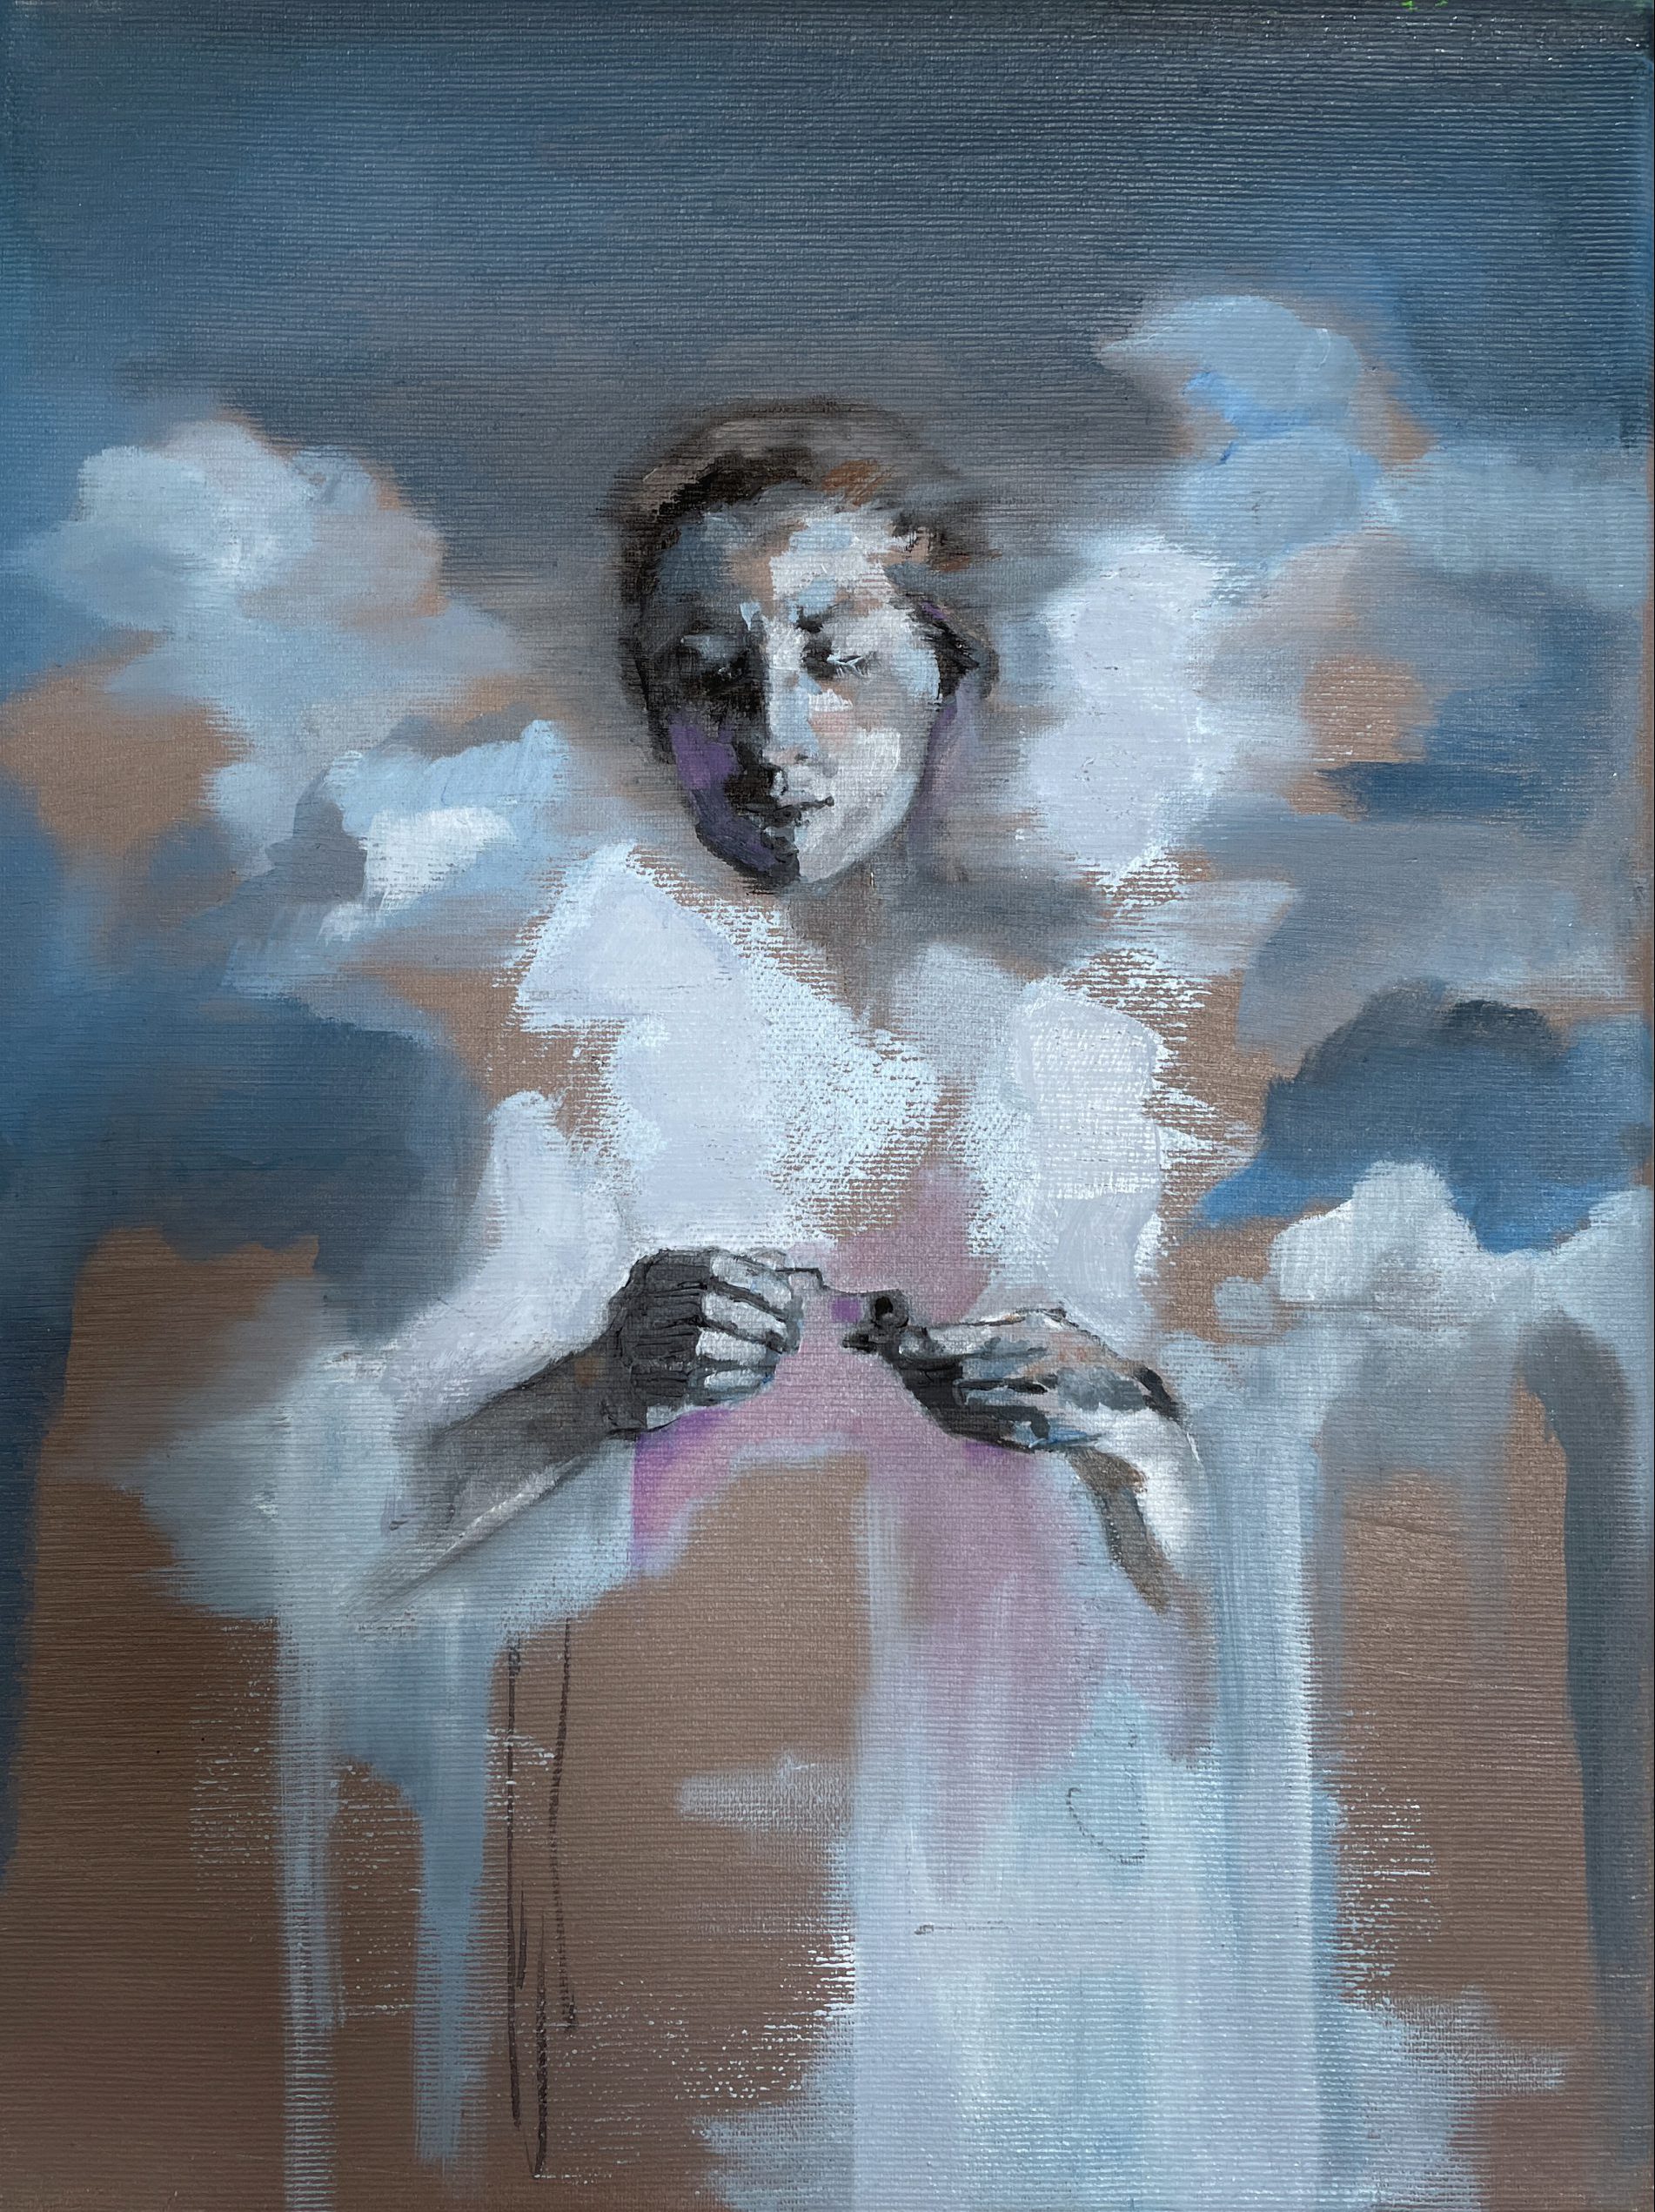 This image was created together with "Transparency" as part of a collaborative exhibition "Look at me" and was inspired by a photograph by Stanislav Erman. It shows a female figure surrounded by clouds. She holds a small music box in her hands. It is only at second glance that the white clouds become angel wings.